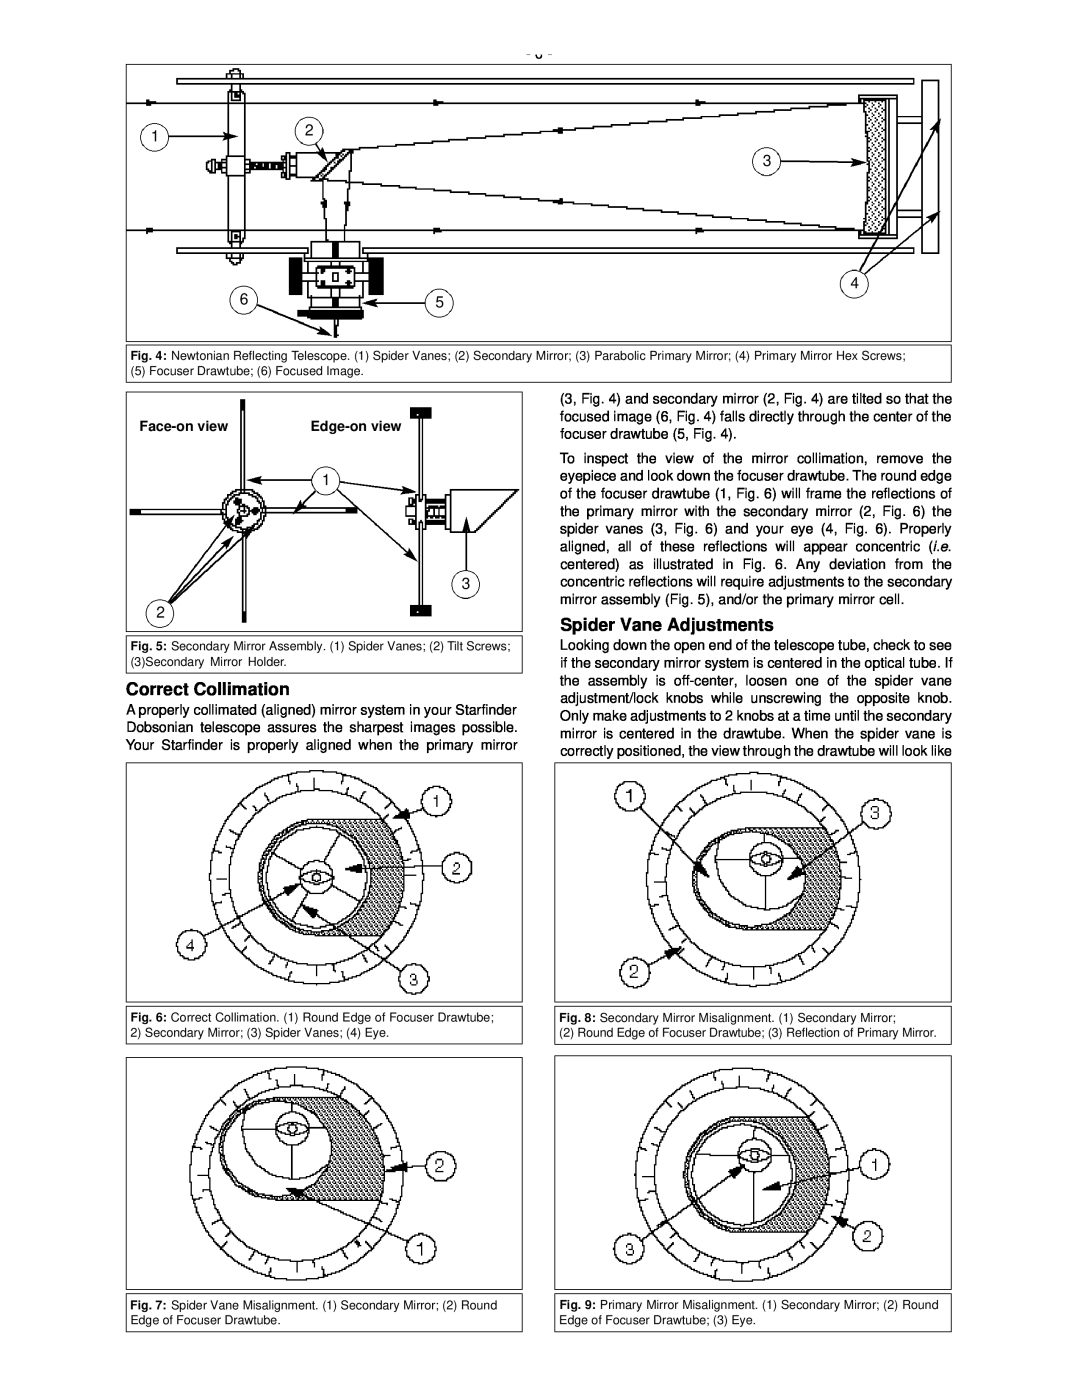 Meade 12.5 instruction manual Correct Collimation, Spider Vane Adjustments, Face-onview 